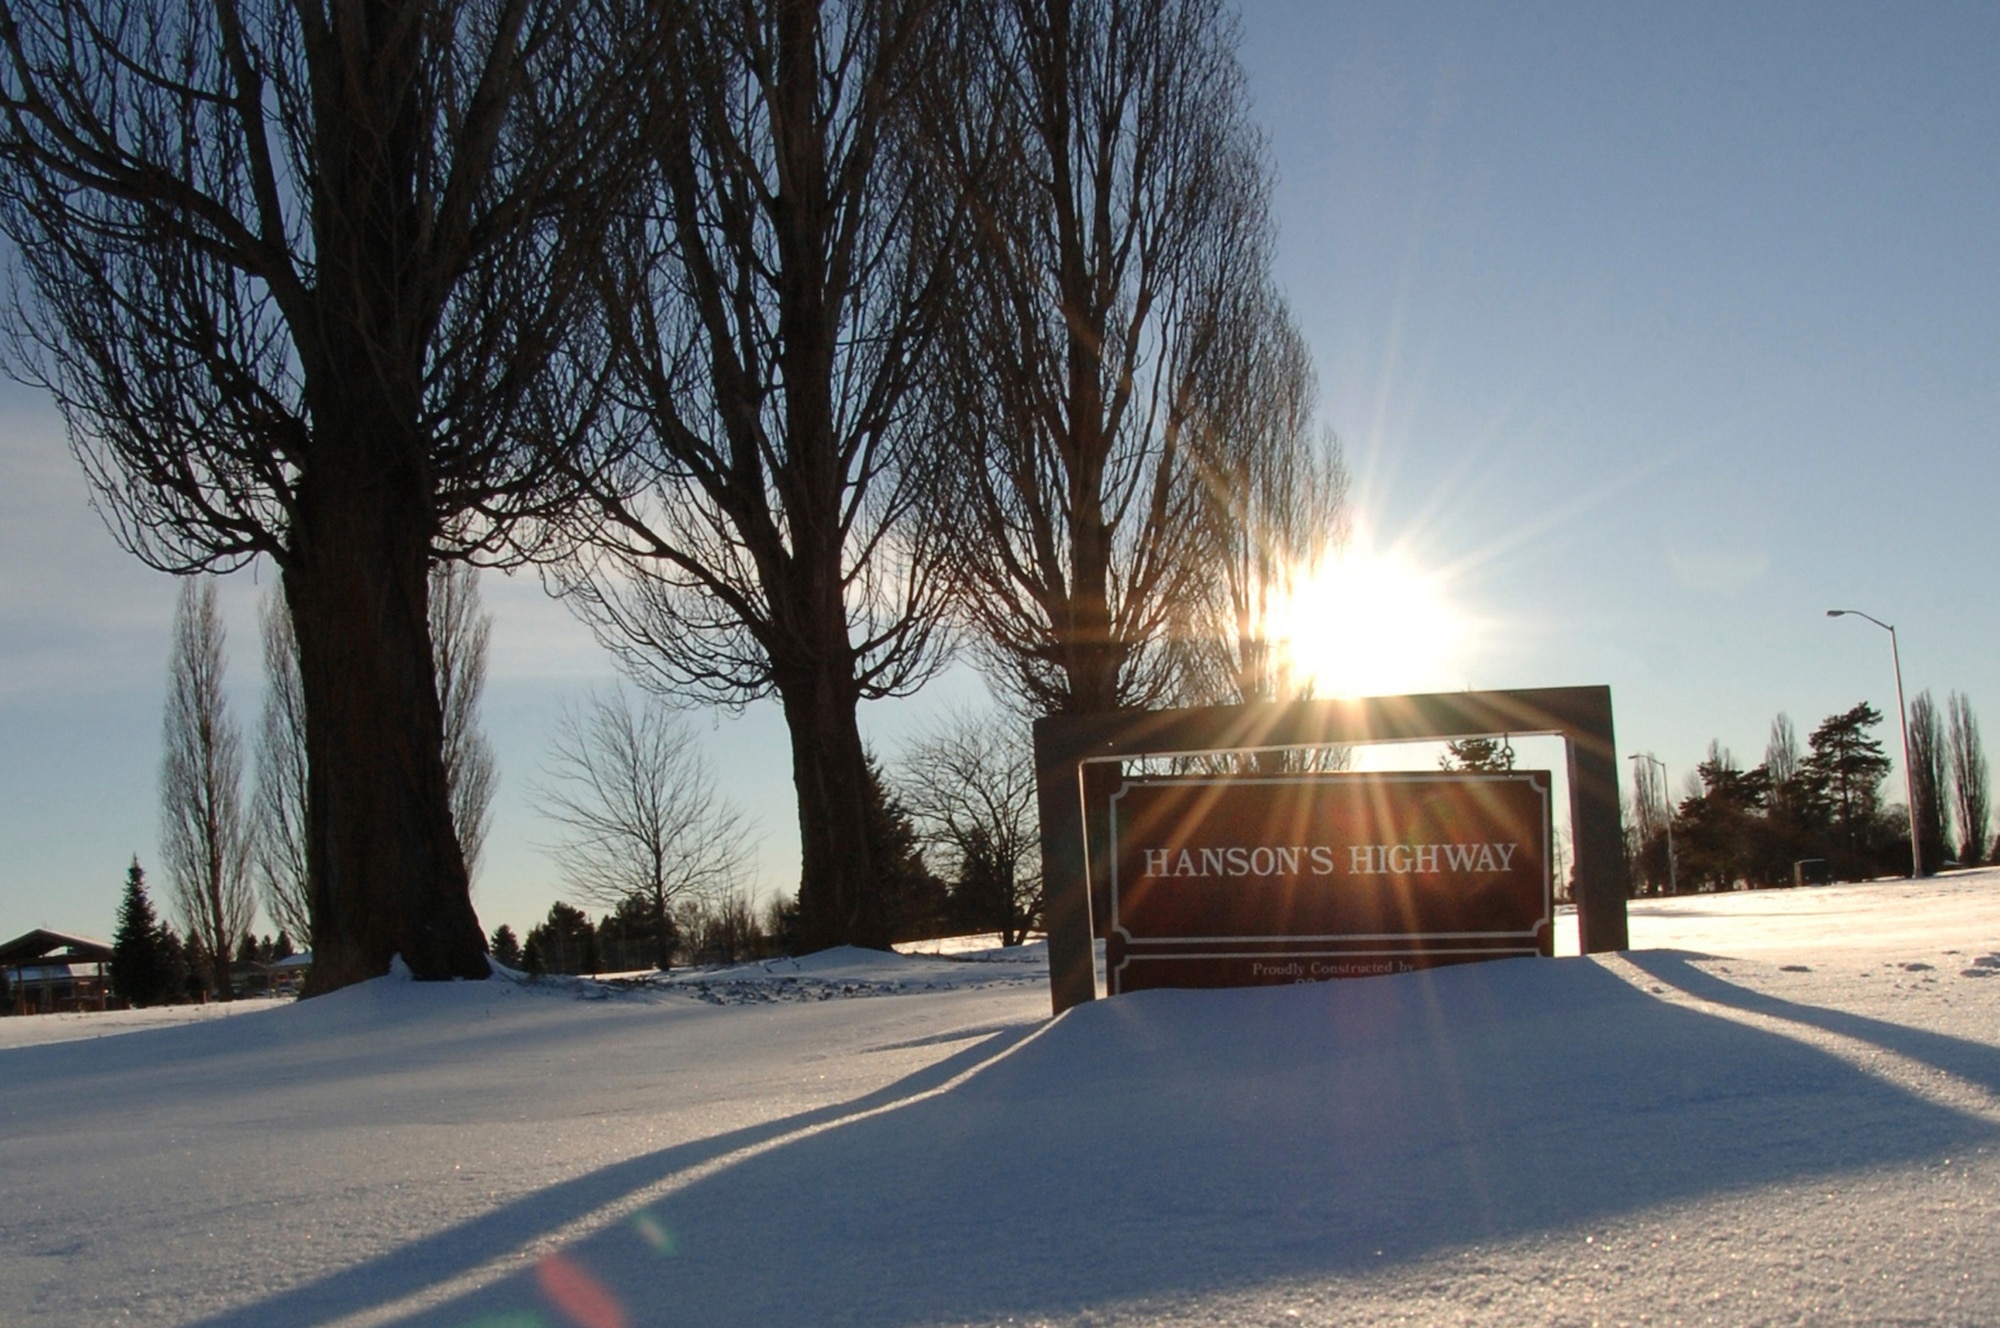 The sun peeks over the hill near Hanson's Highway. Over the past week, Fairchild has received a layer of snow that has blanketed the entire base in white.